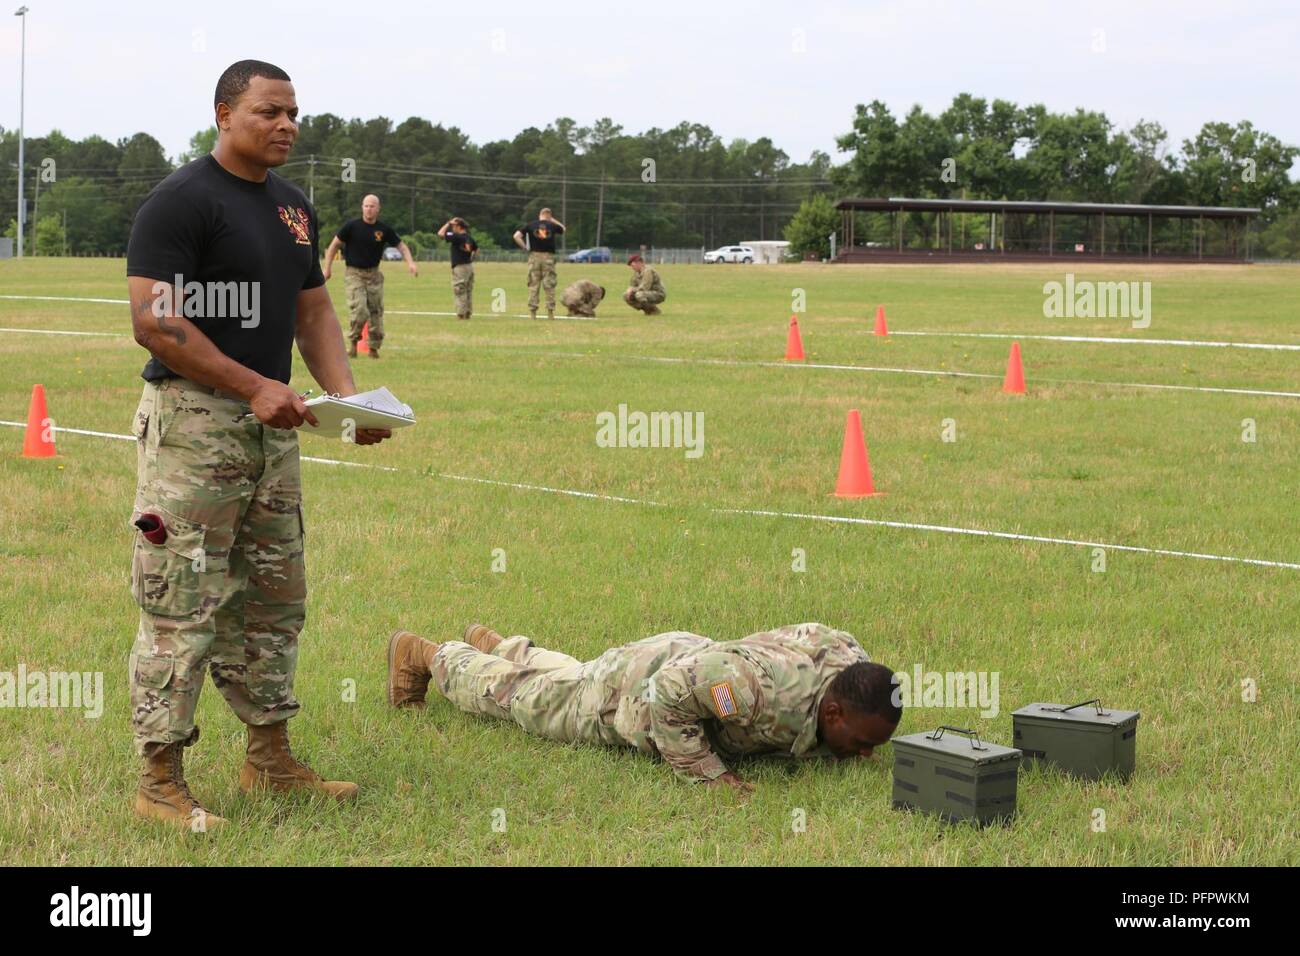 U.S. Army Sgt. Javonte Parker, assigned to 189th CSSB, Sustainment Brigade, 82nd Airborne Division, does pushups after throwing a grenade during the Maneuver Under Fire portion of the All American Week XXIX Combat Fitnees Test on Pike Field at Fort Bragg, N.C., May 21, 2018.During All American Week XXIX, paratroopers from all over the 82nd Division compete in a series of events, The Combat Fitness Test is an event designed to test a Paratrooper's functional fitness and gives a more accurate representation of what Paratroopers are trained to do. Stock Photo